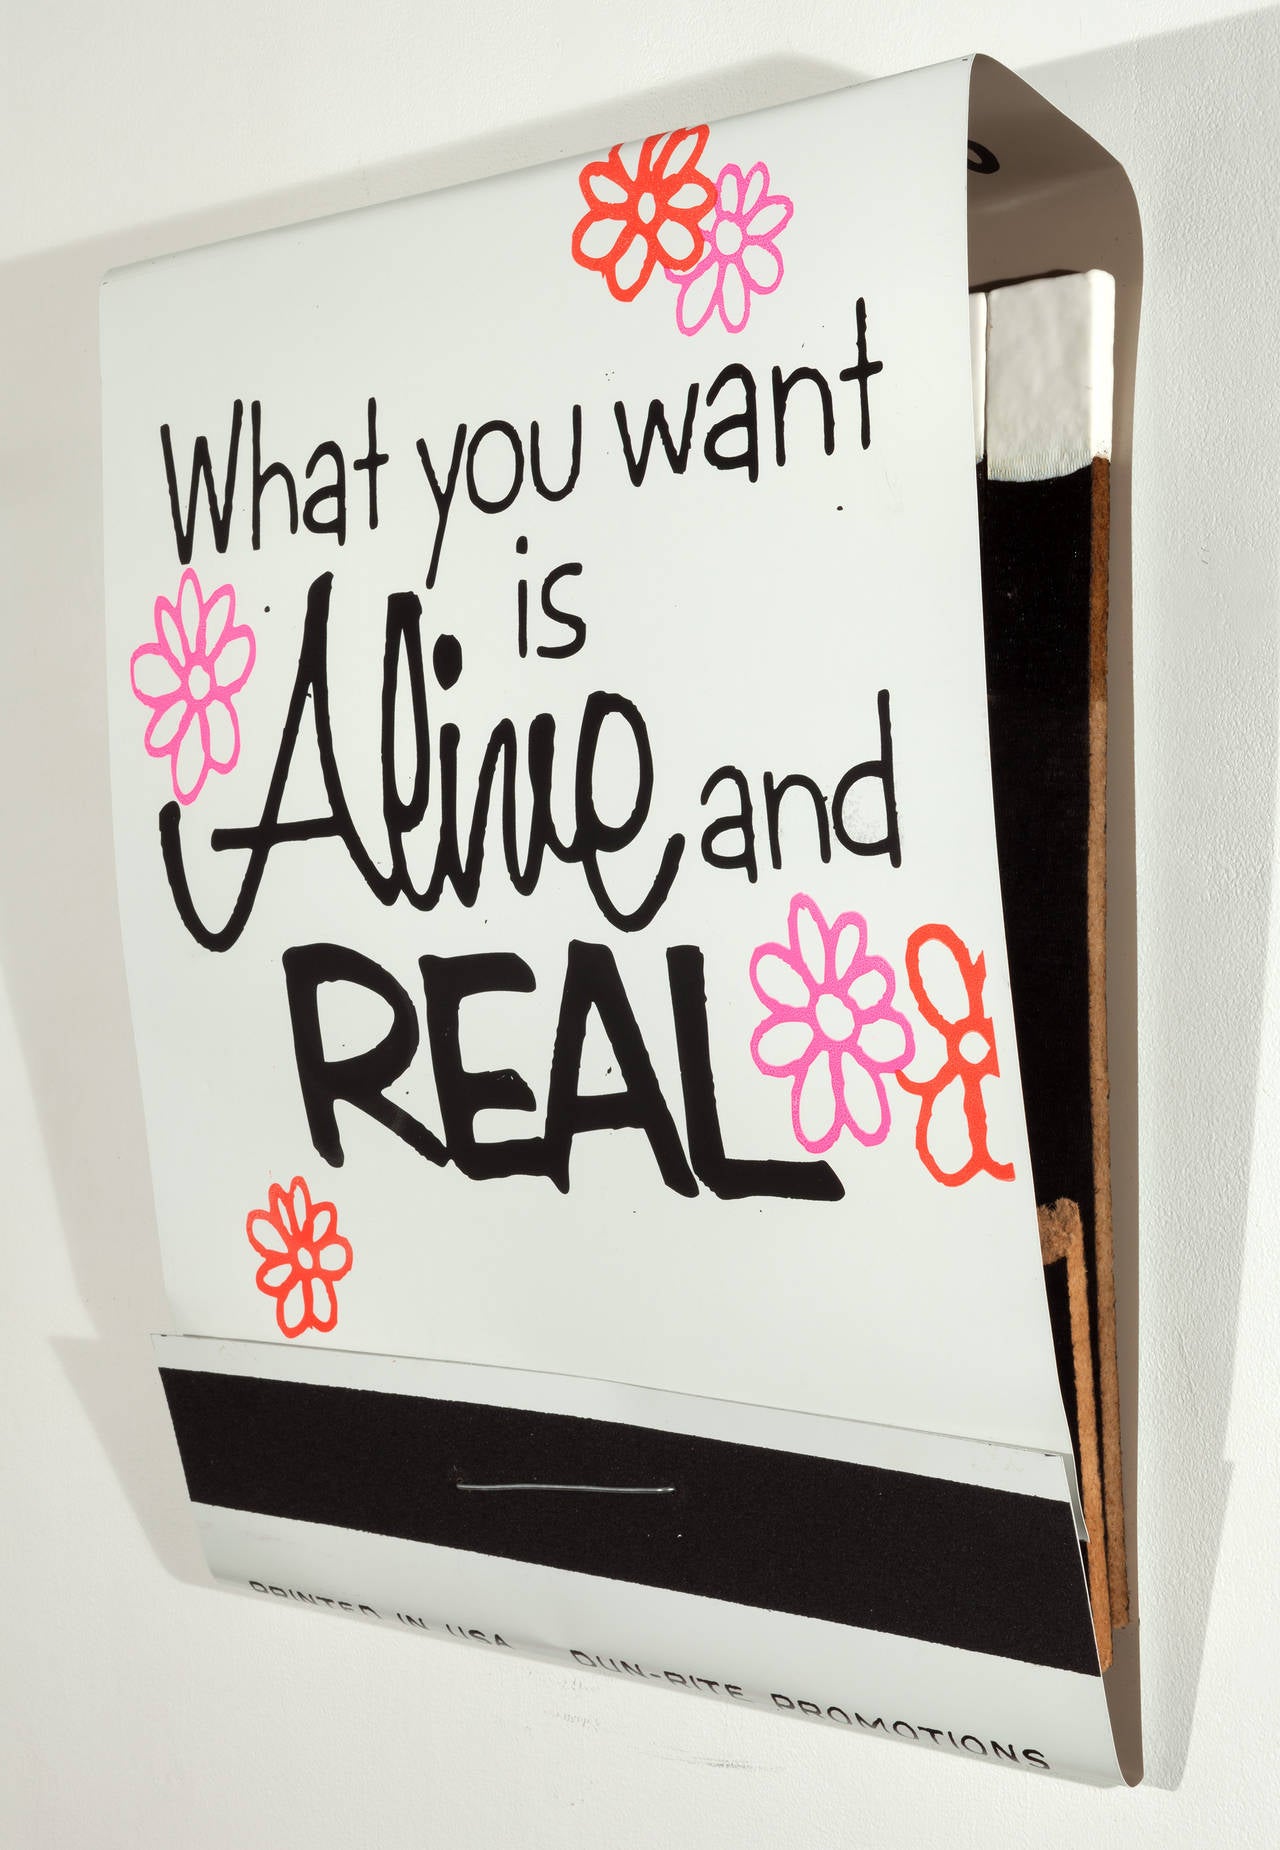 What You Want is Alive and Real - Pop Art Sculpture by Skylar Fein